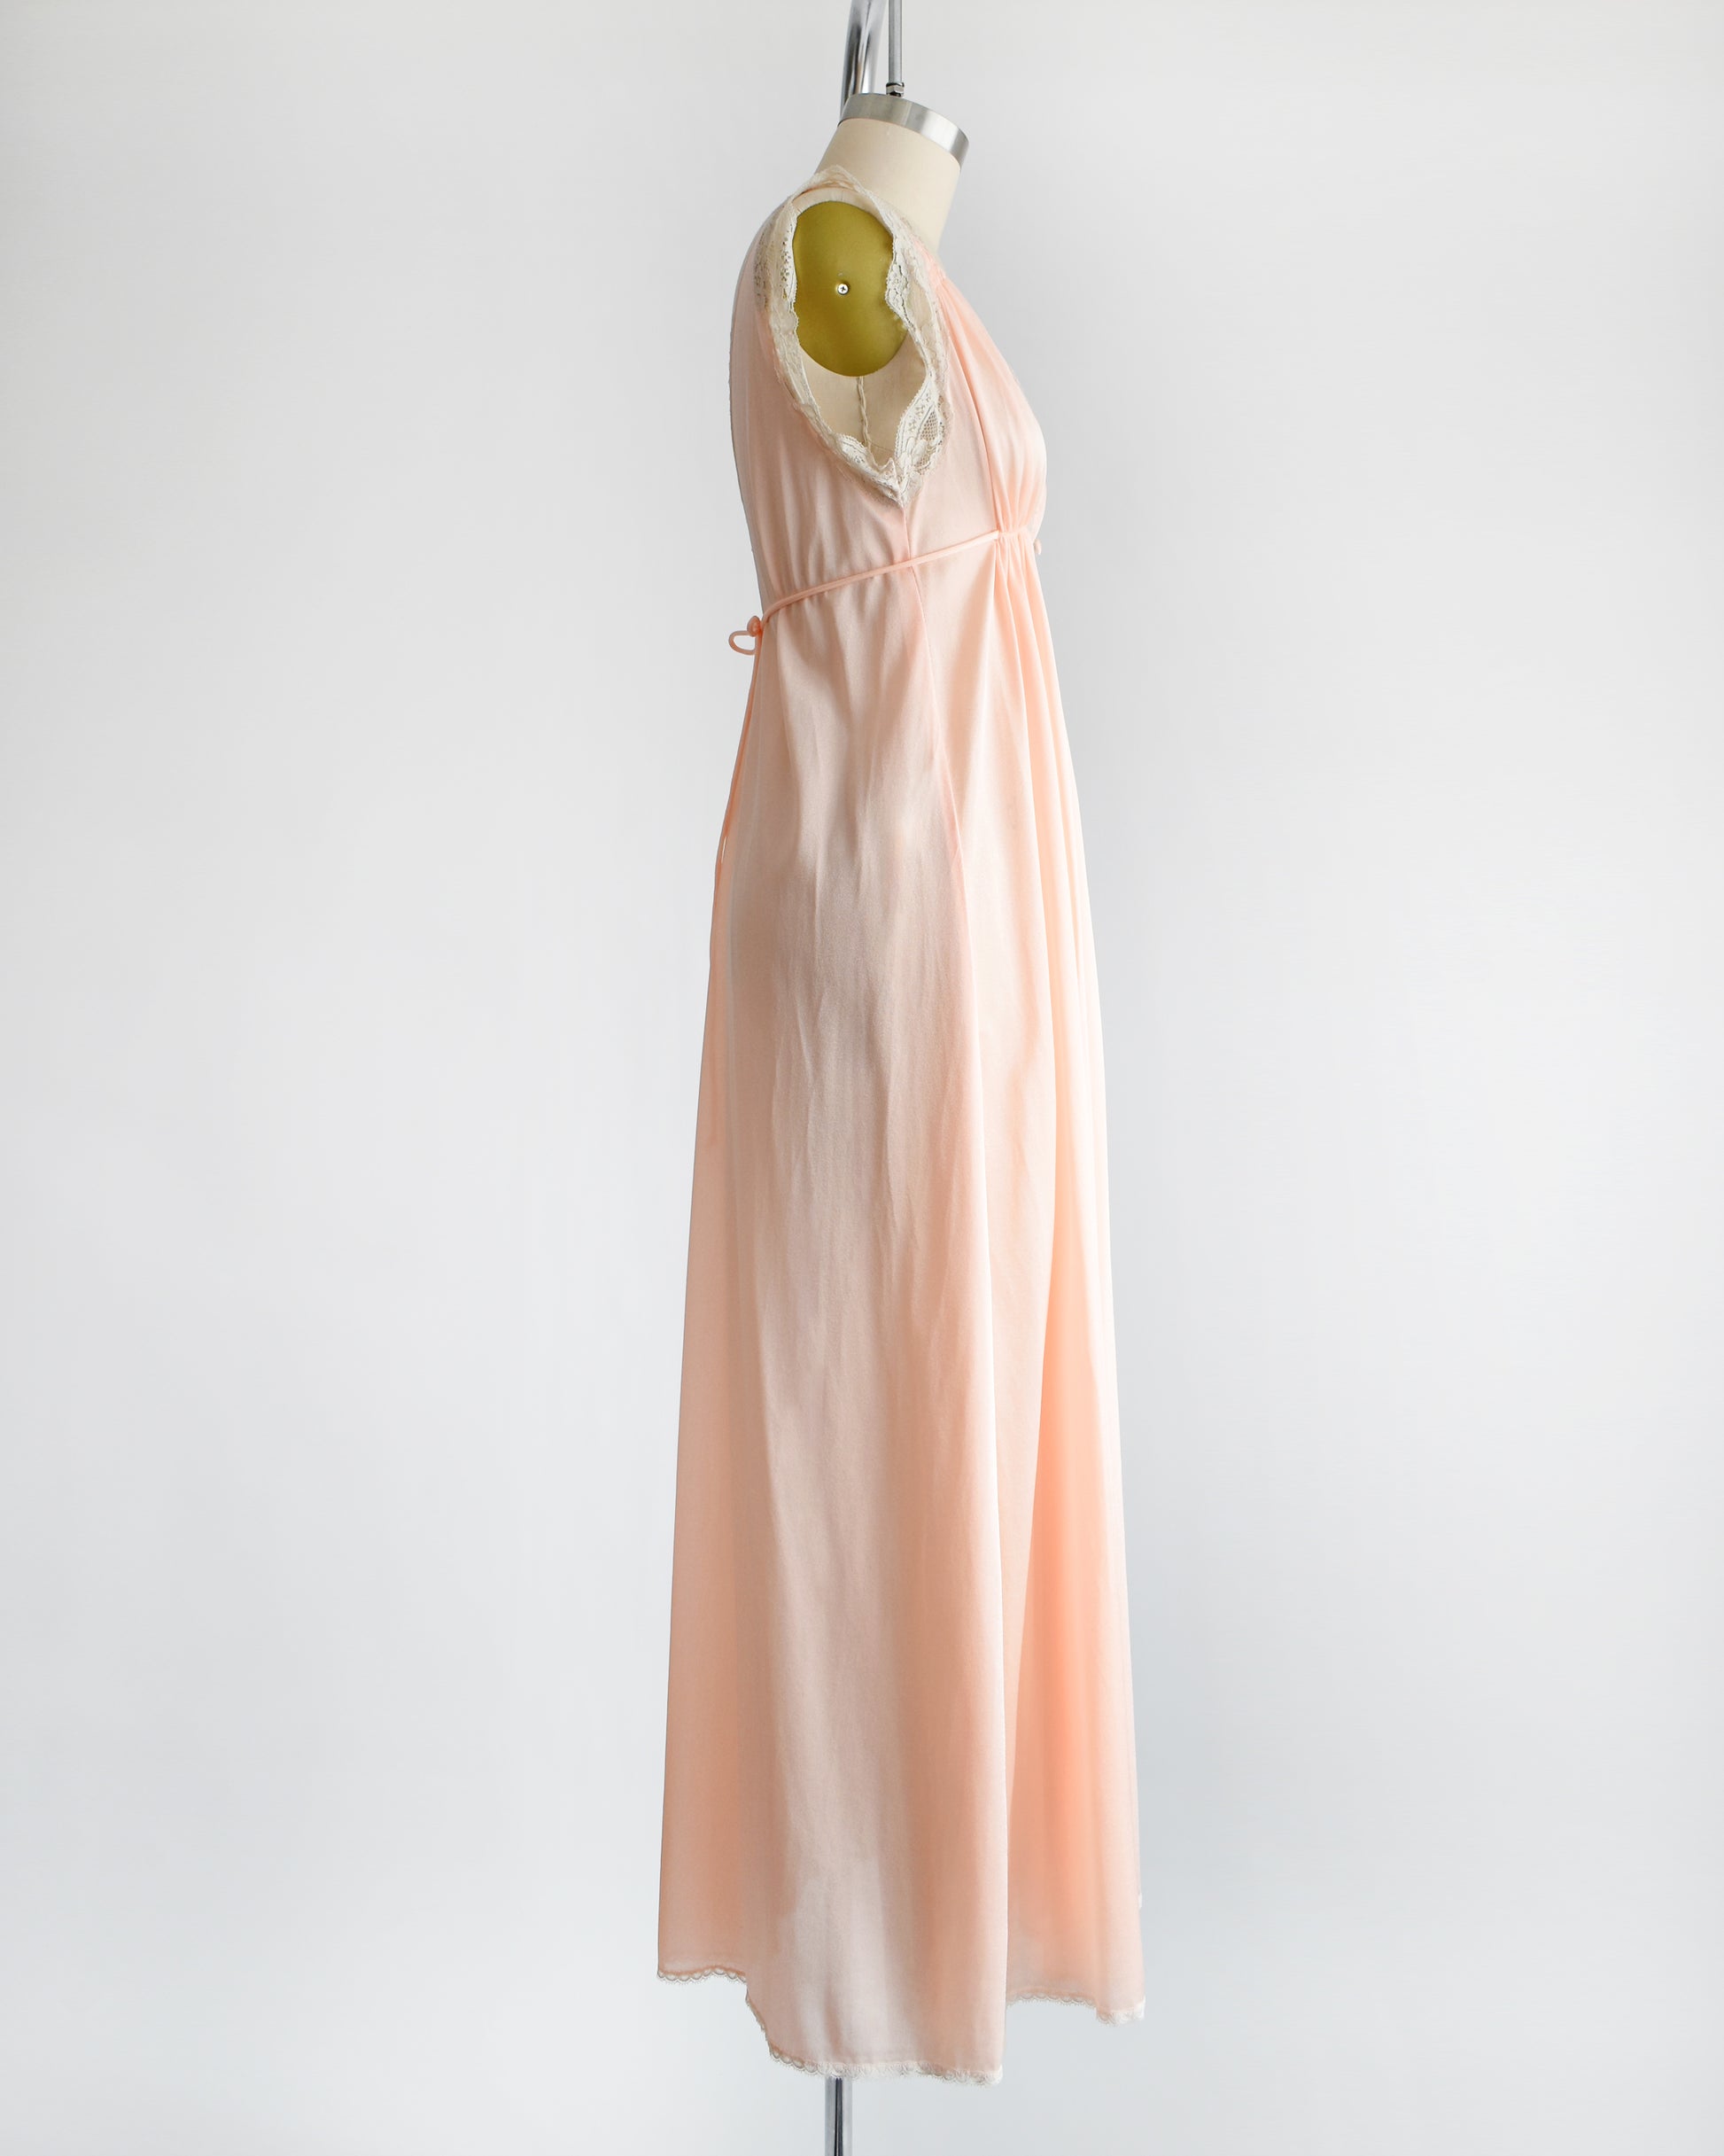 Side view of a vintage 1970s peach nightgown with lace trim